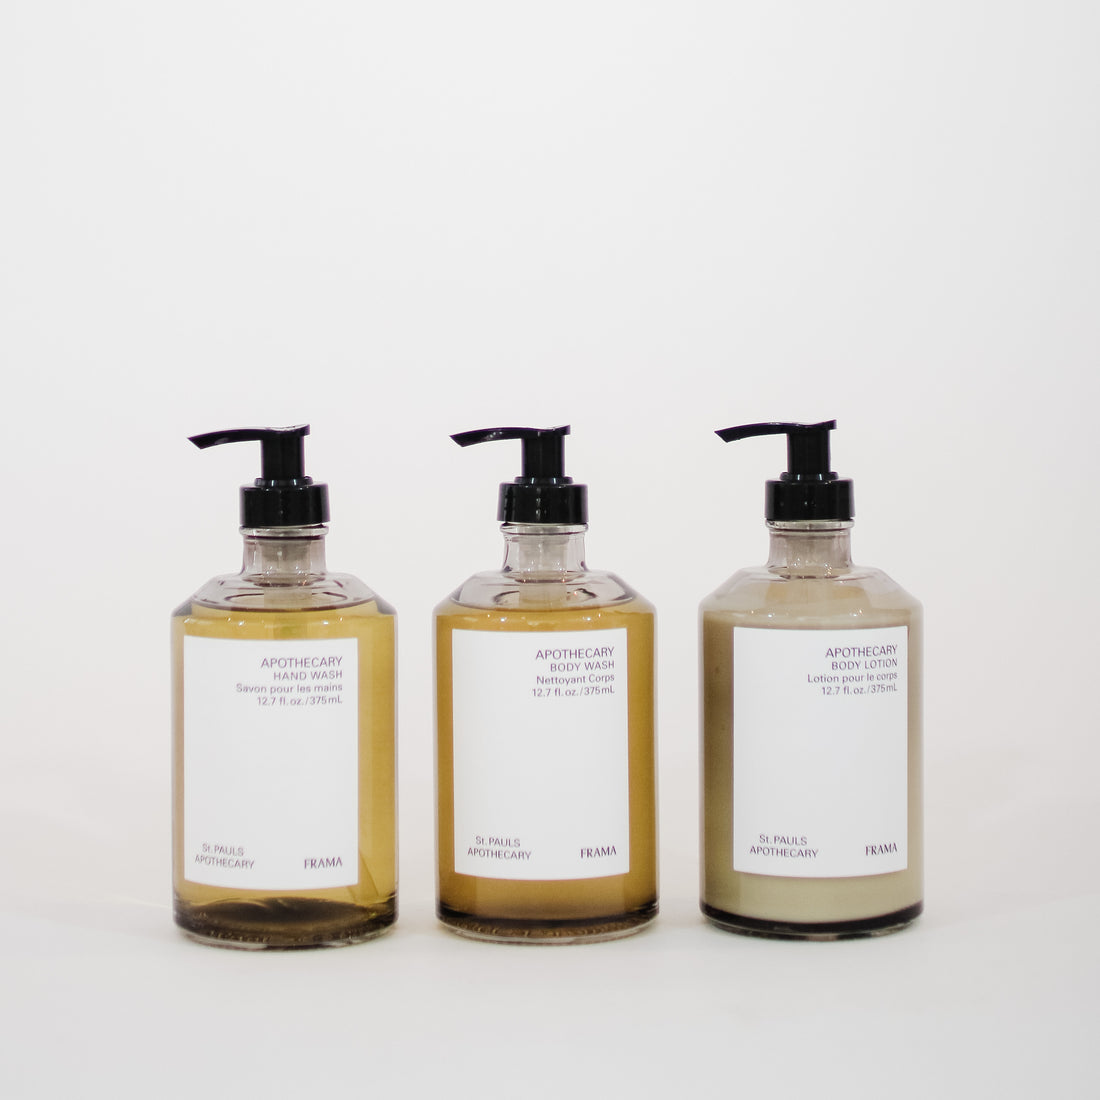  Apothecary Body Wash - KM Home